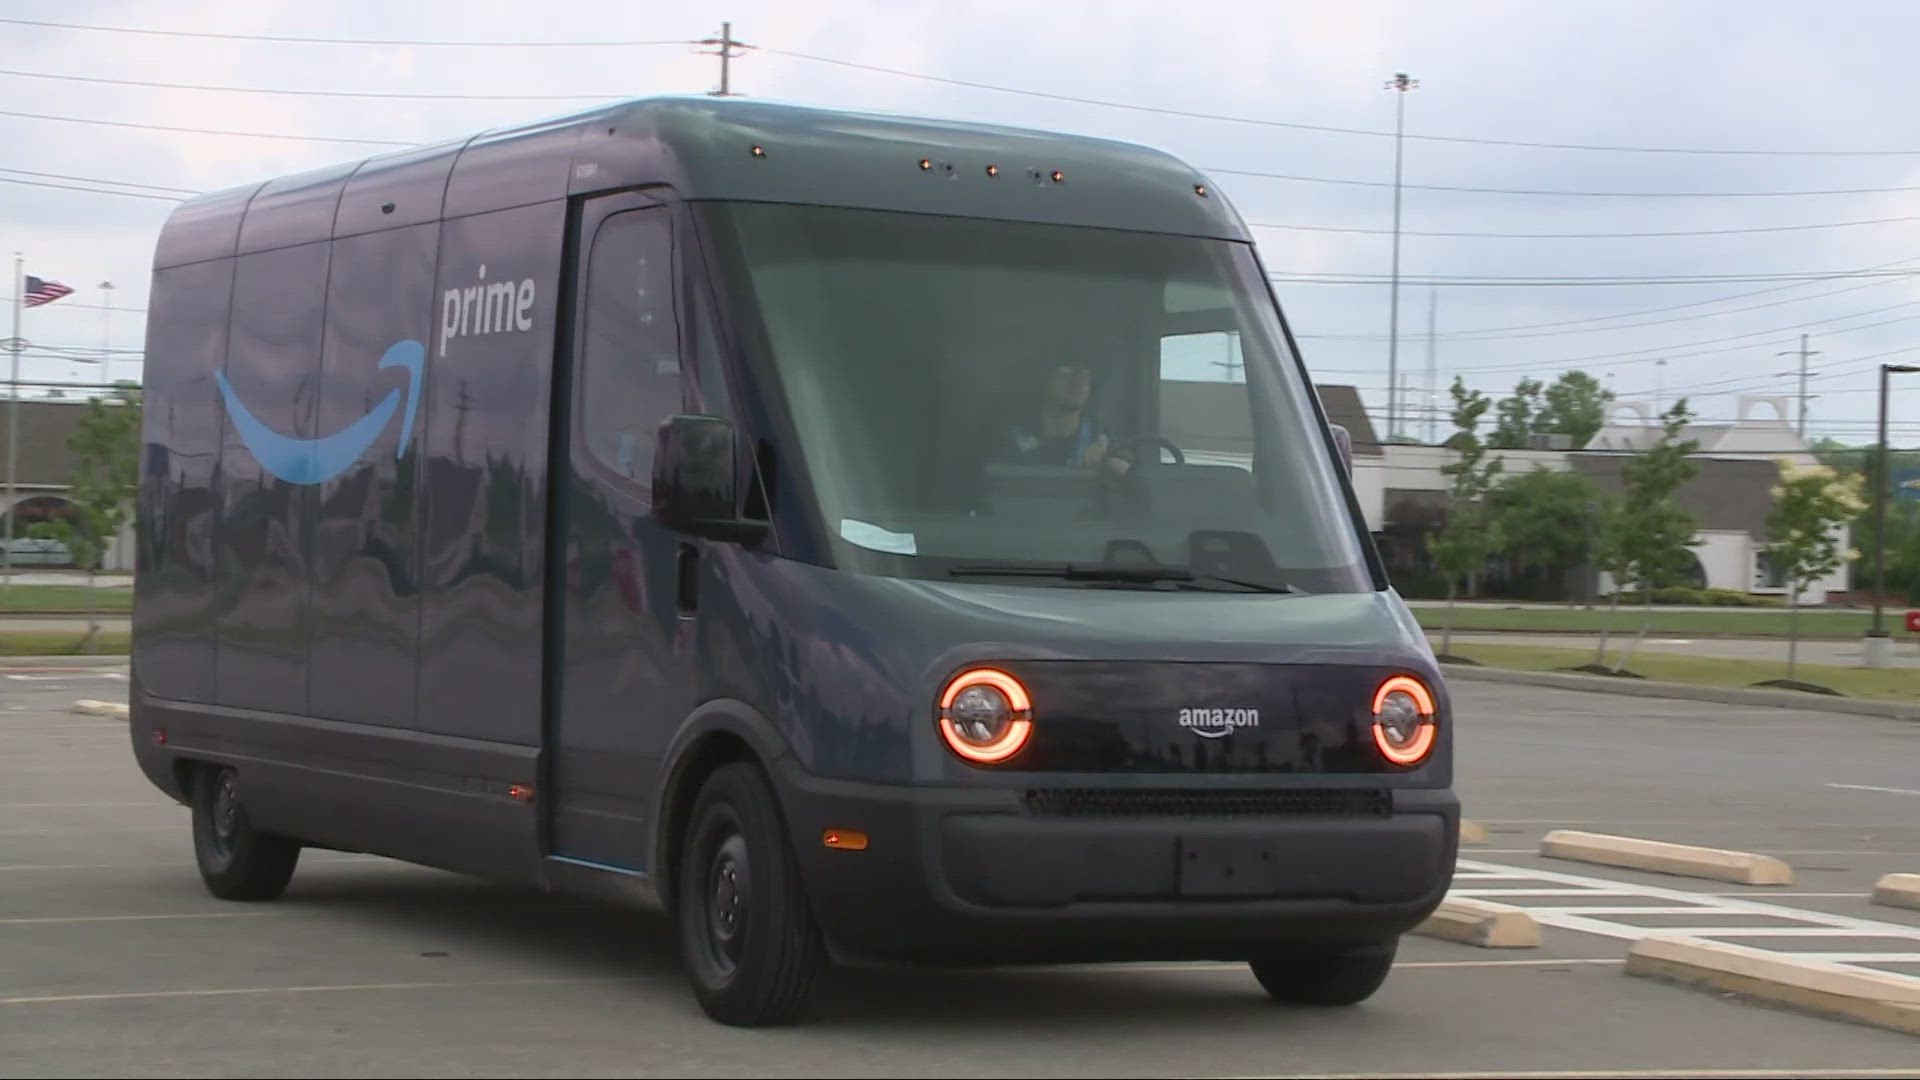 Amazon gave 3News a tour of their new custom electric delivery vehicles. Plus, ODOT has a $140M plan to build new EV charging stations across the state.